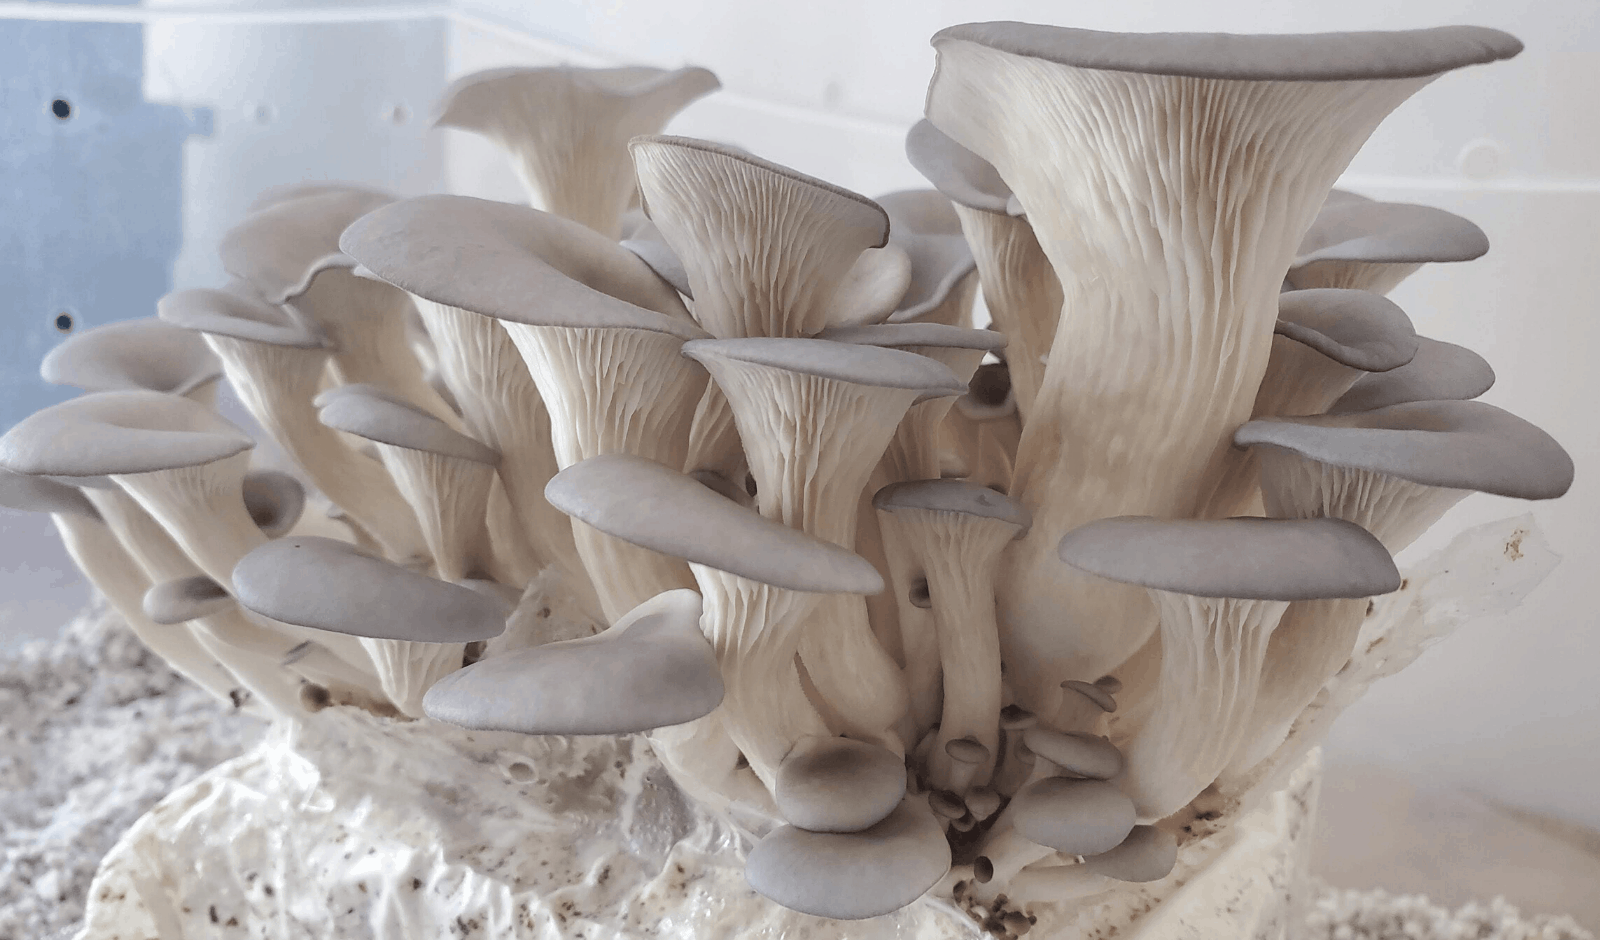 mushroom growing kits - complete guide, reviews and top picks